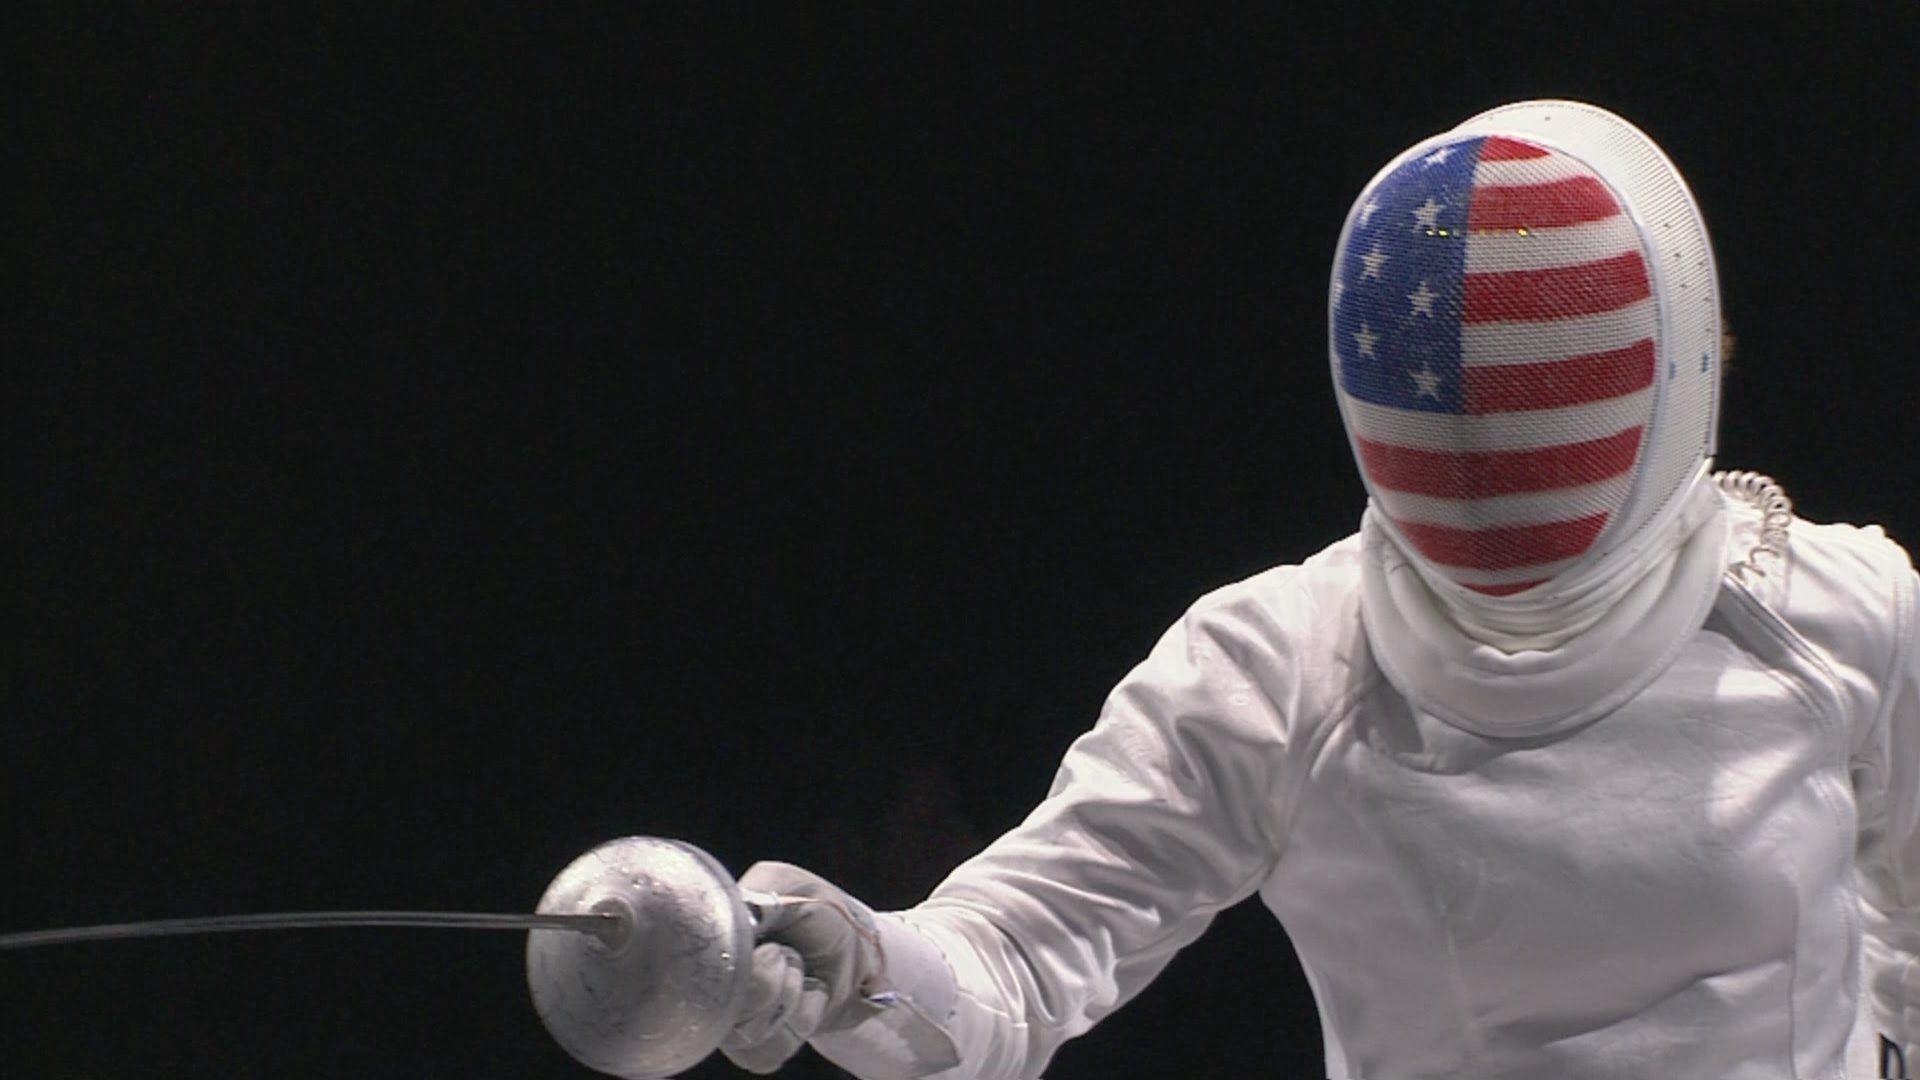 Epee sports wallpaper